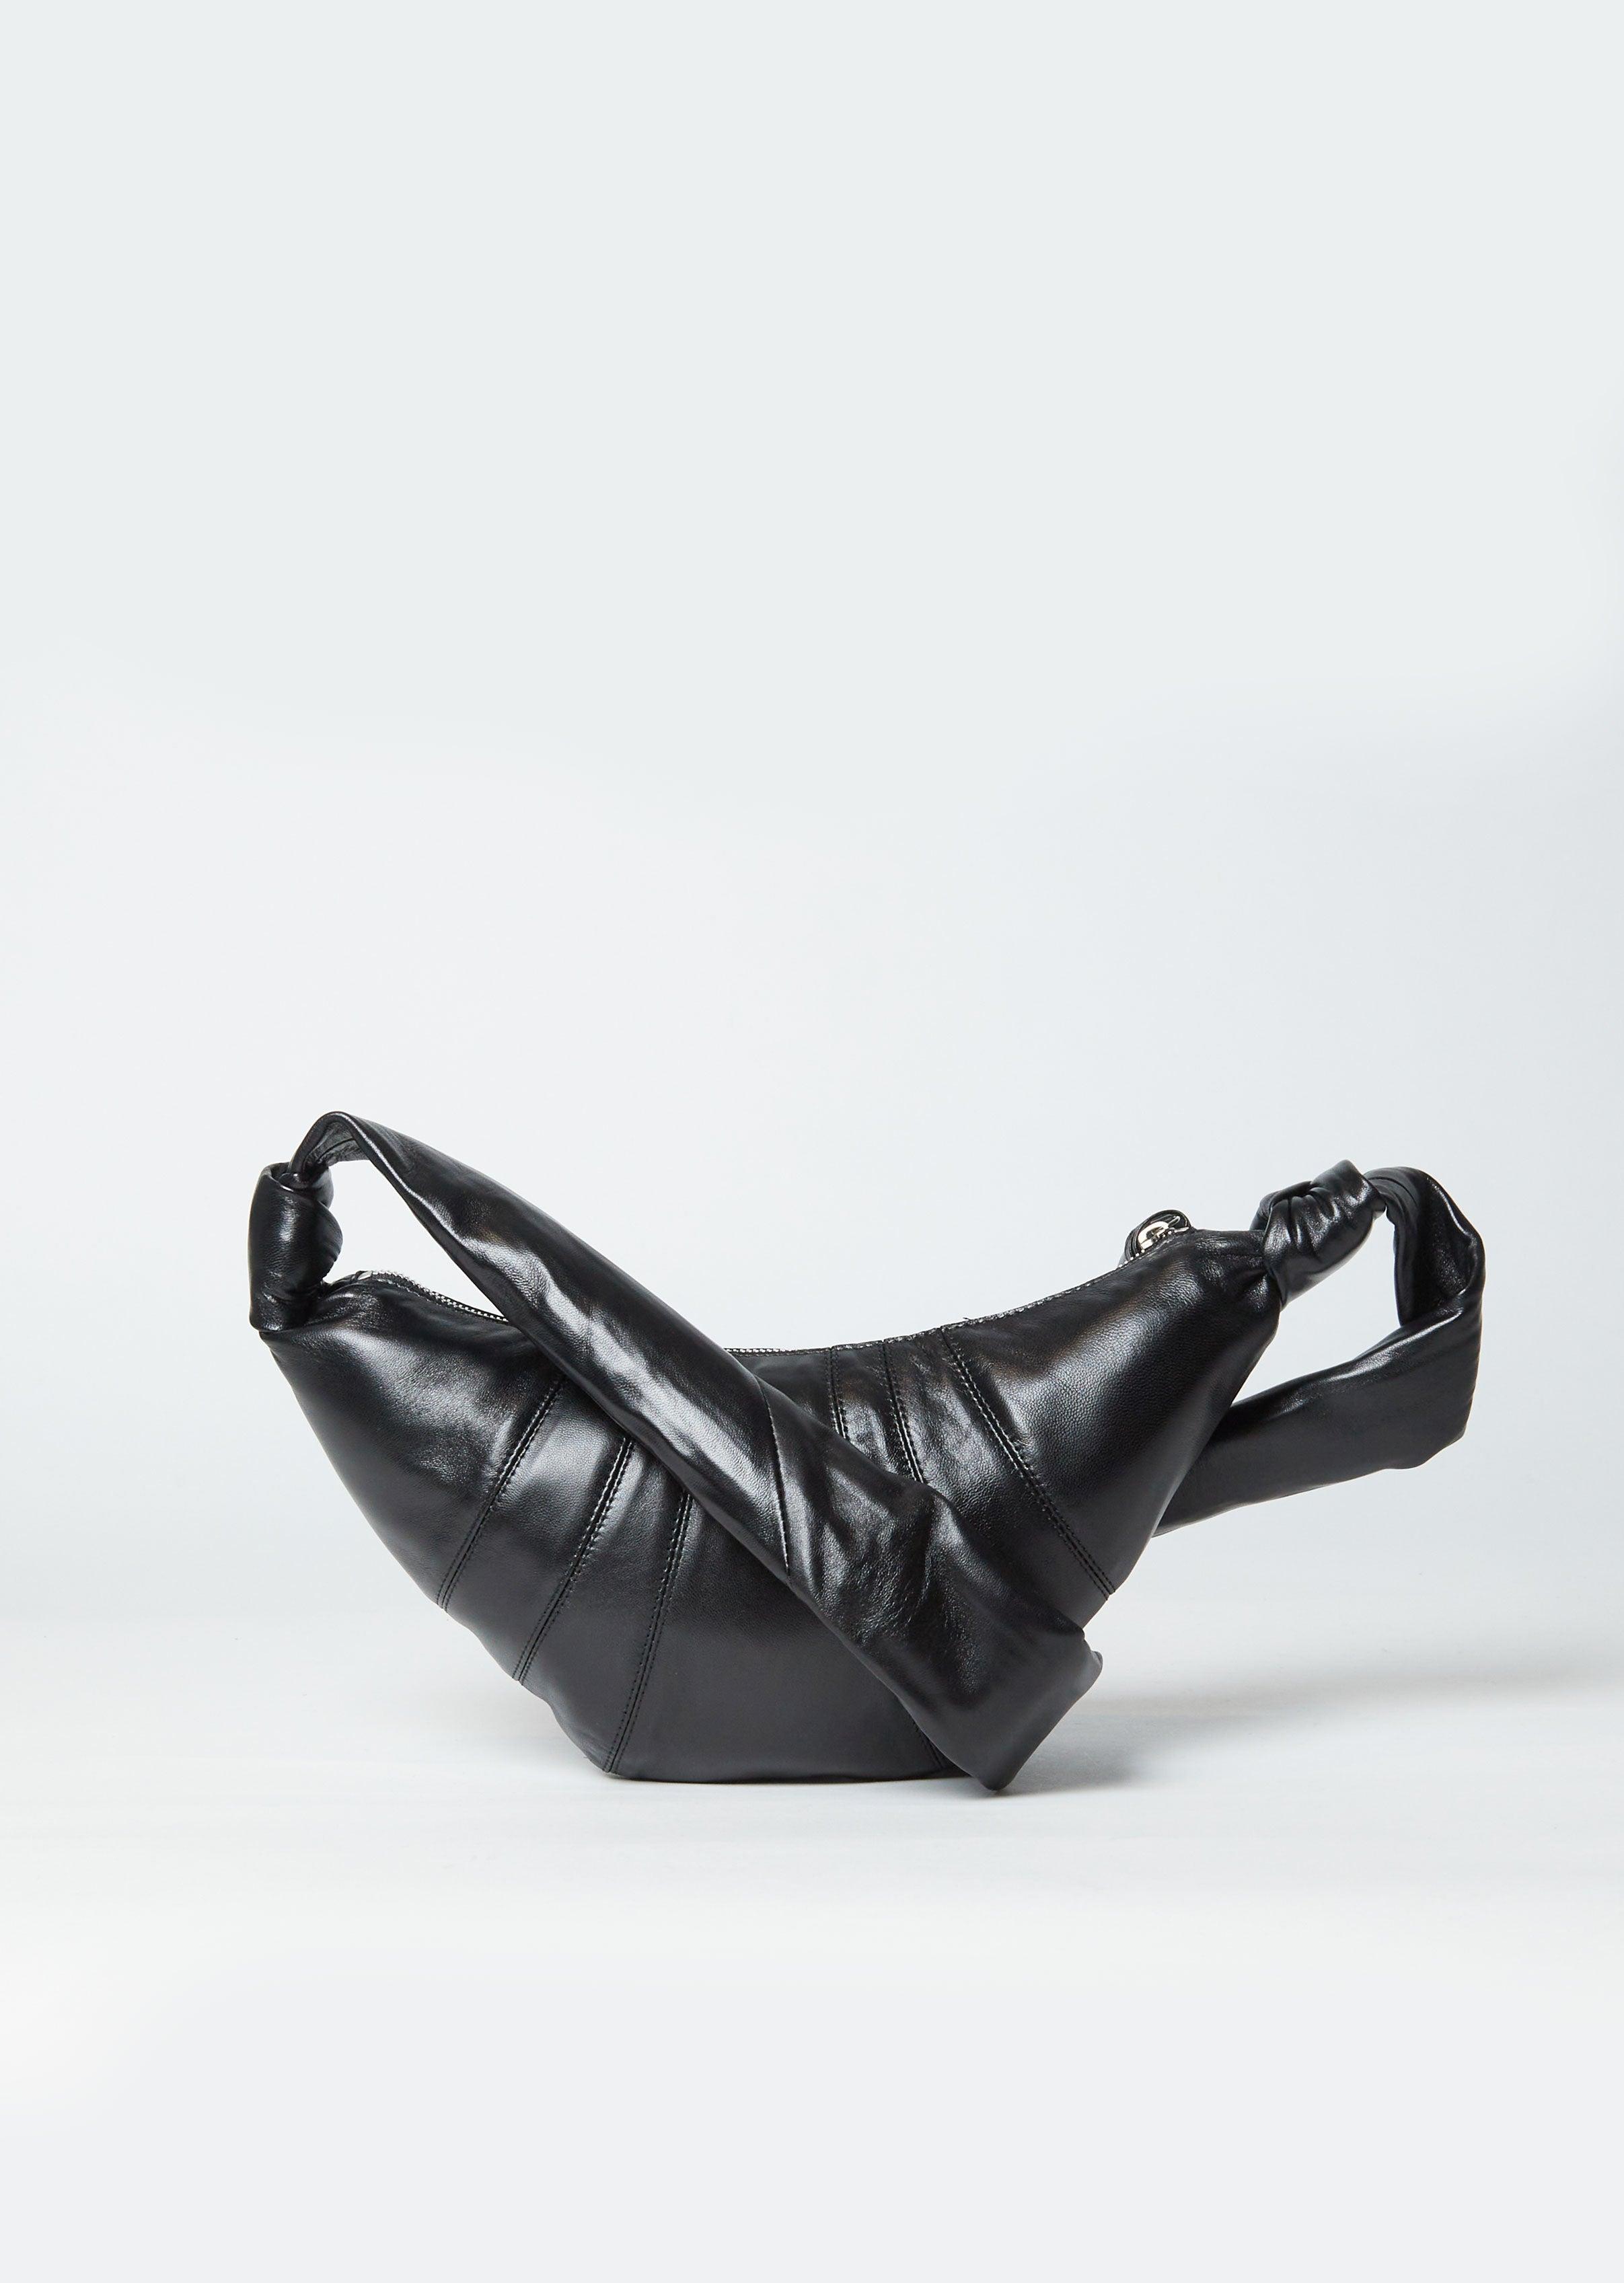 Lemaire Small Croissant Bag in Black | Lyst